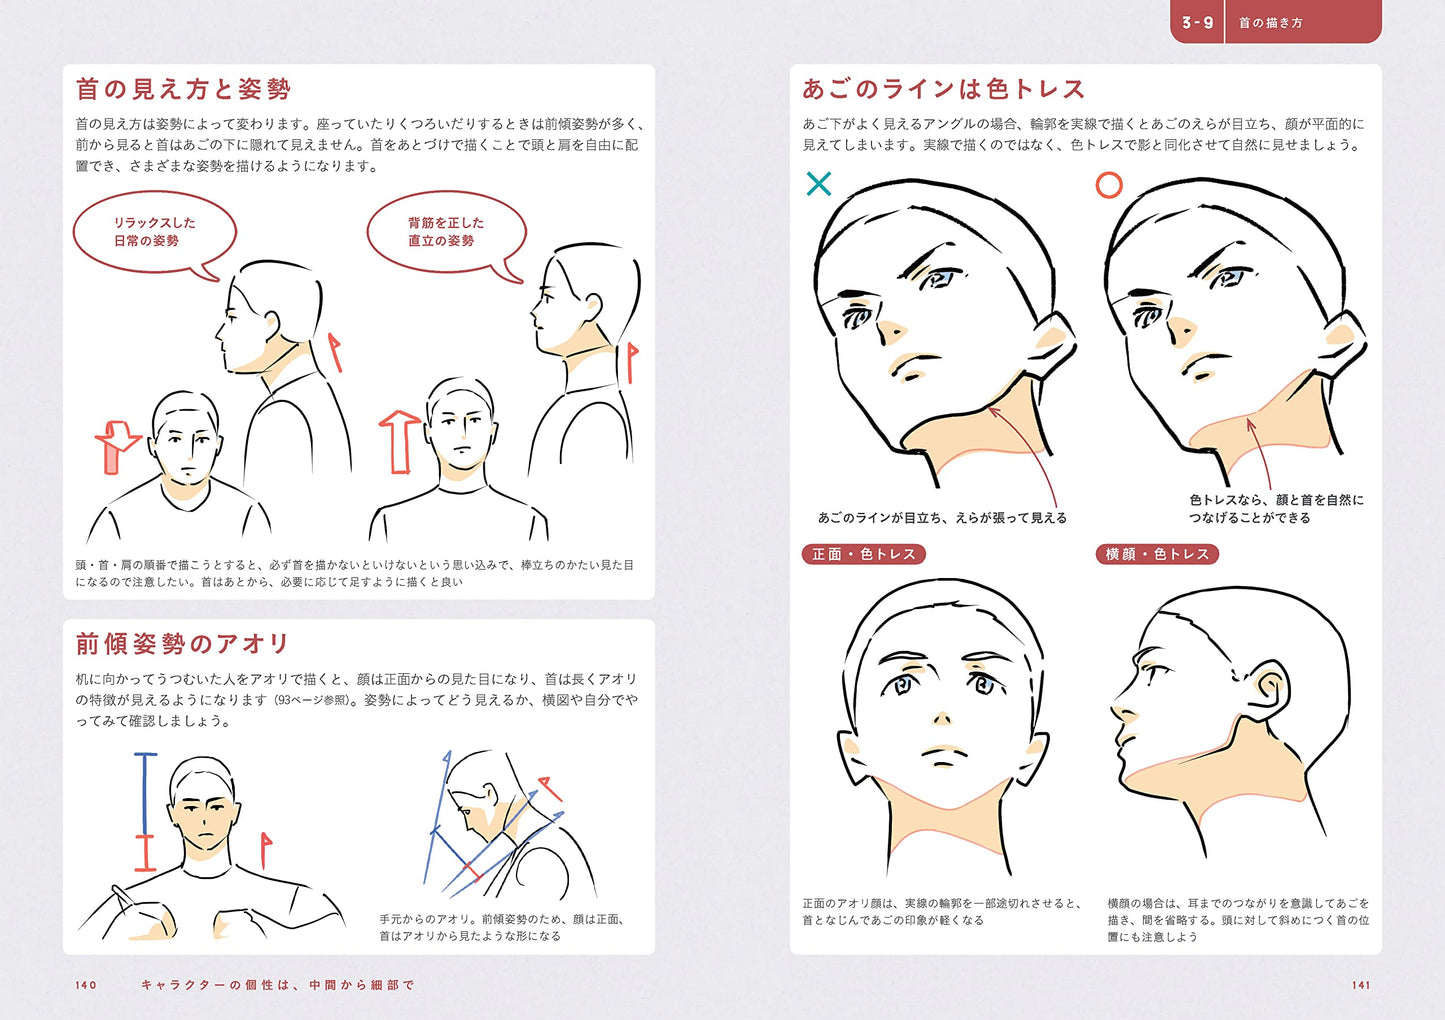 Easy face drawing technique with the strongest 3 steps